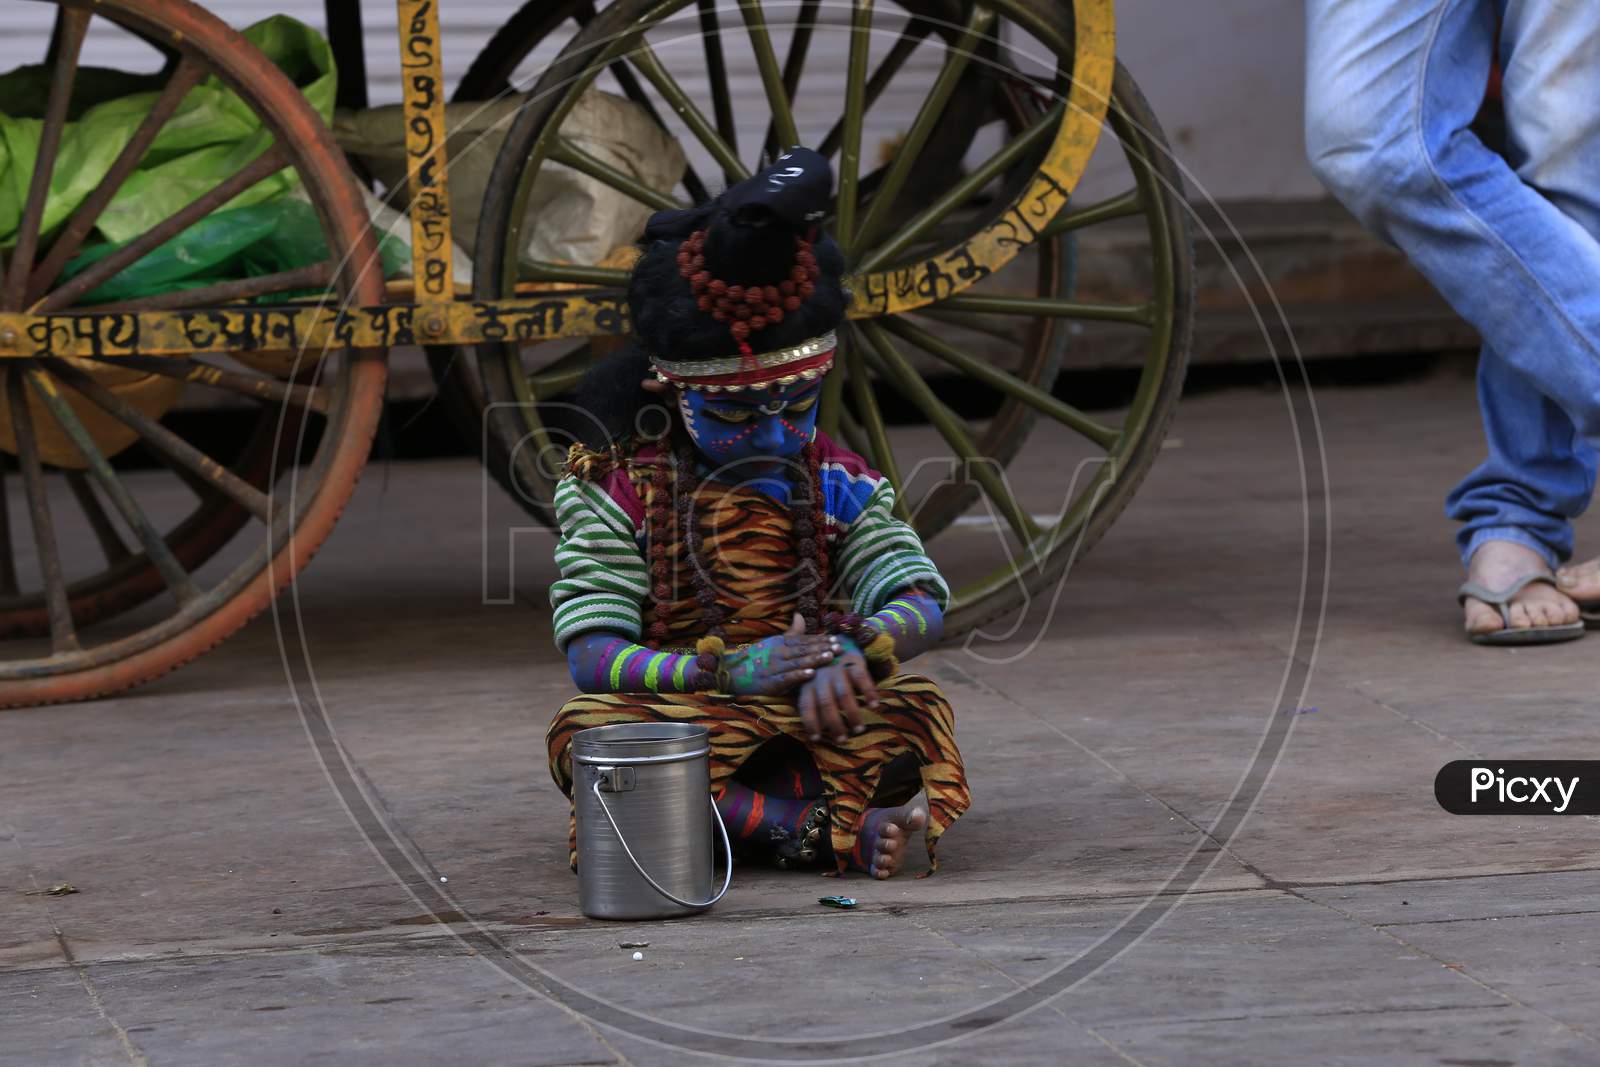 A young child dressed as the Hindu deity Shiva waiting for alms from pilgrims in Pushkar, Rajasthan, India.